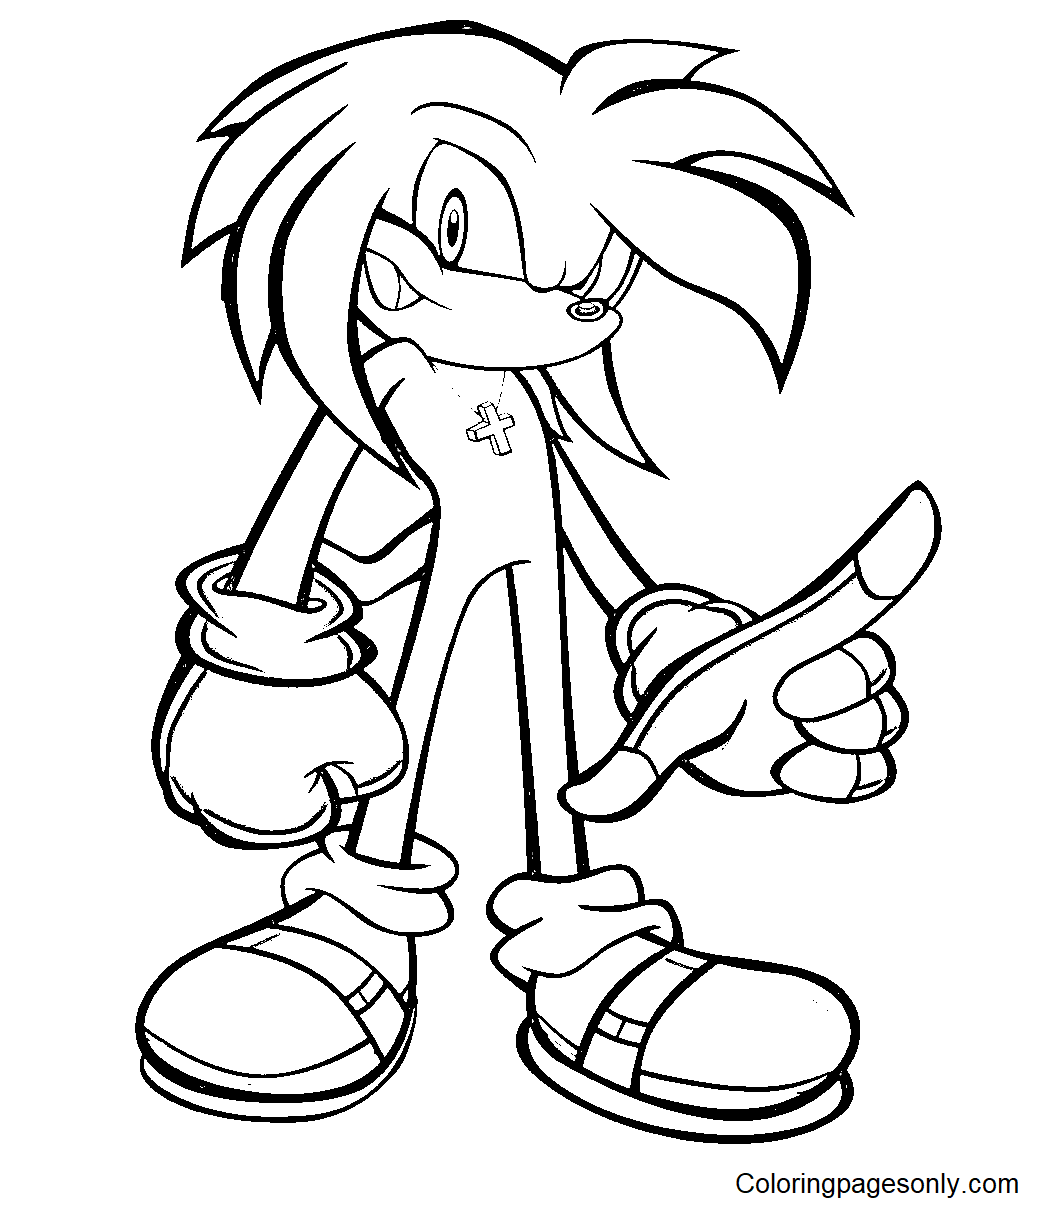 Knuckles Cartoon Coloring Pages